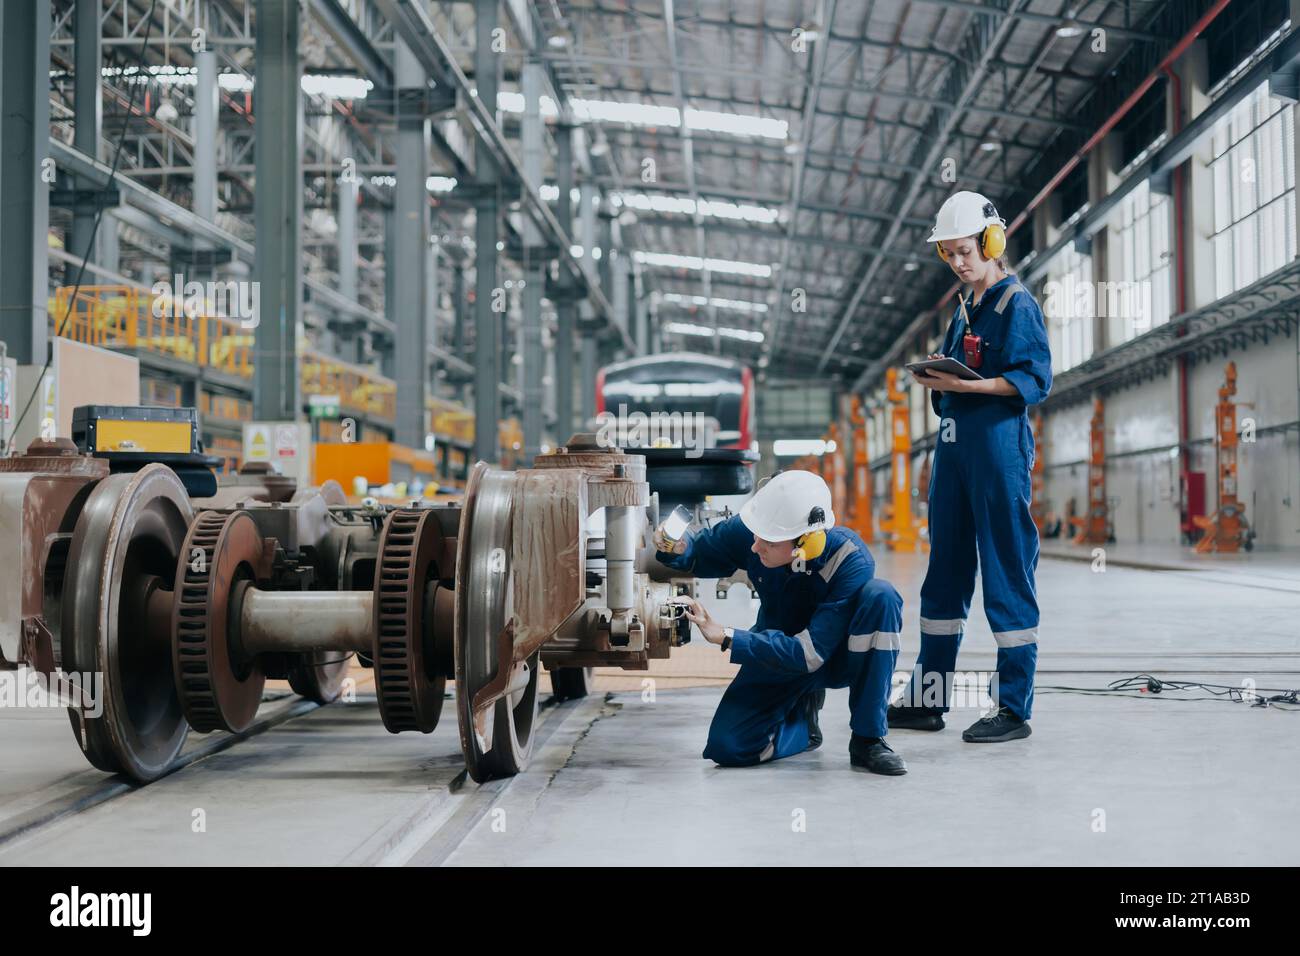 Professional electricity train rail engineer worker working train service inspector checking track rail system in train depot workshop Stock Photo